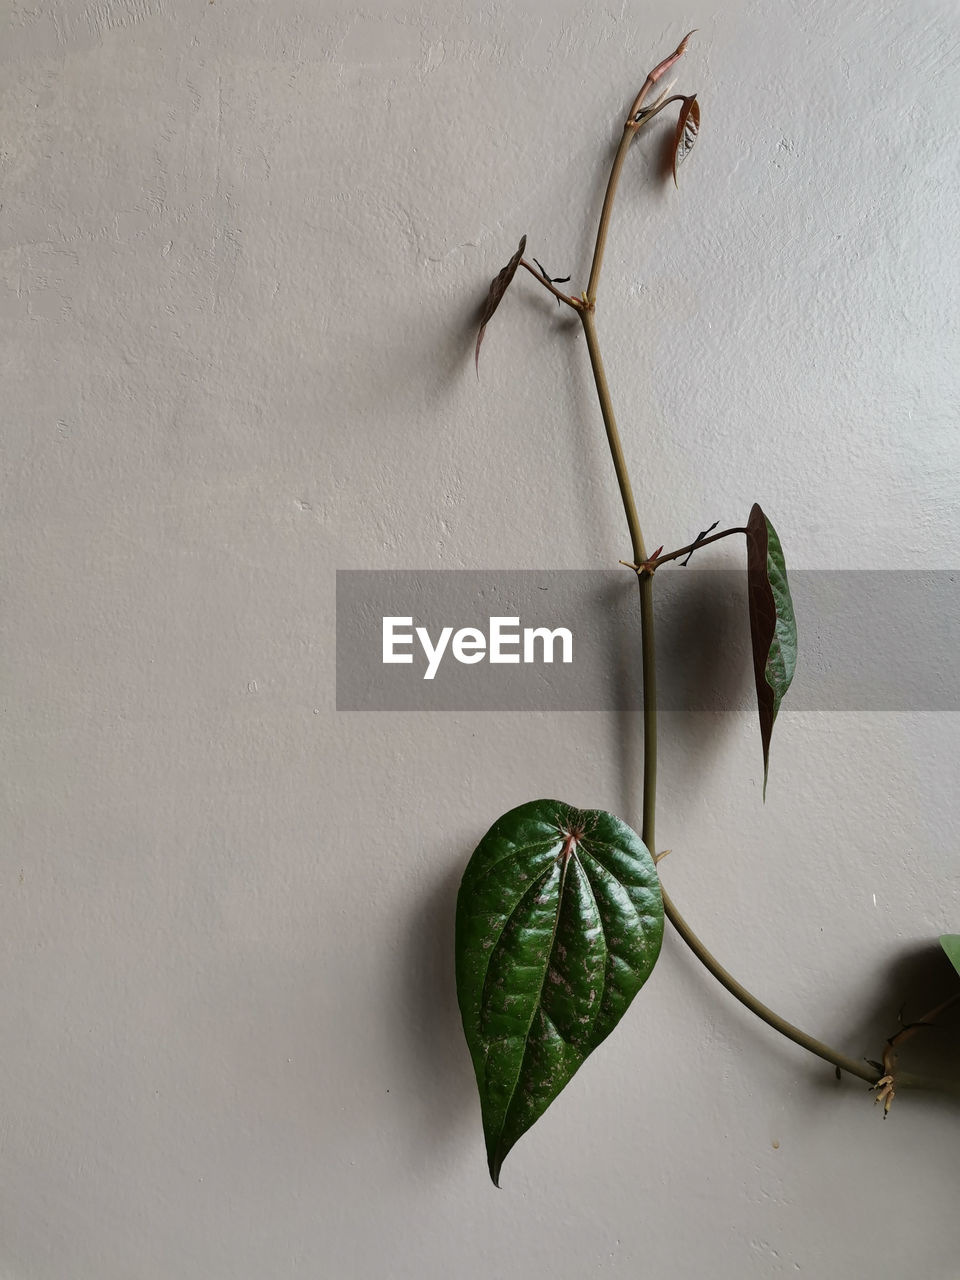 leaf, green, plant part, branch, no people, plant, nature, indoors, flower, wall - building feature, twig, close-up, studio shot, art, still life